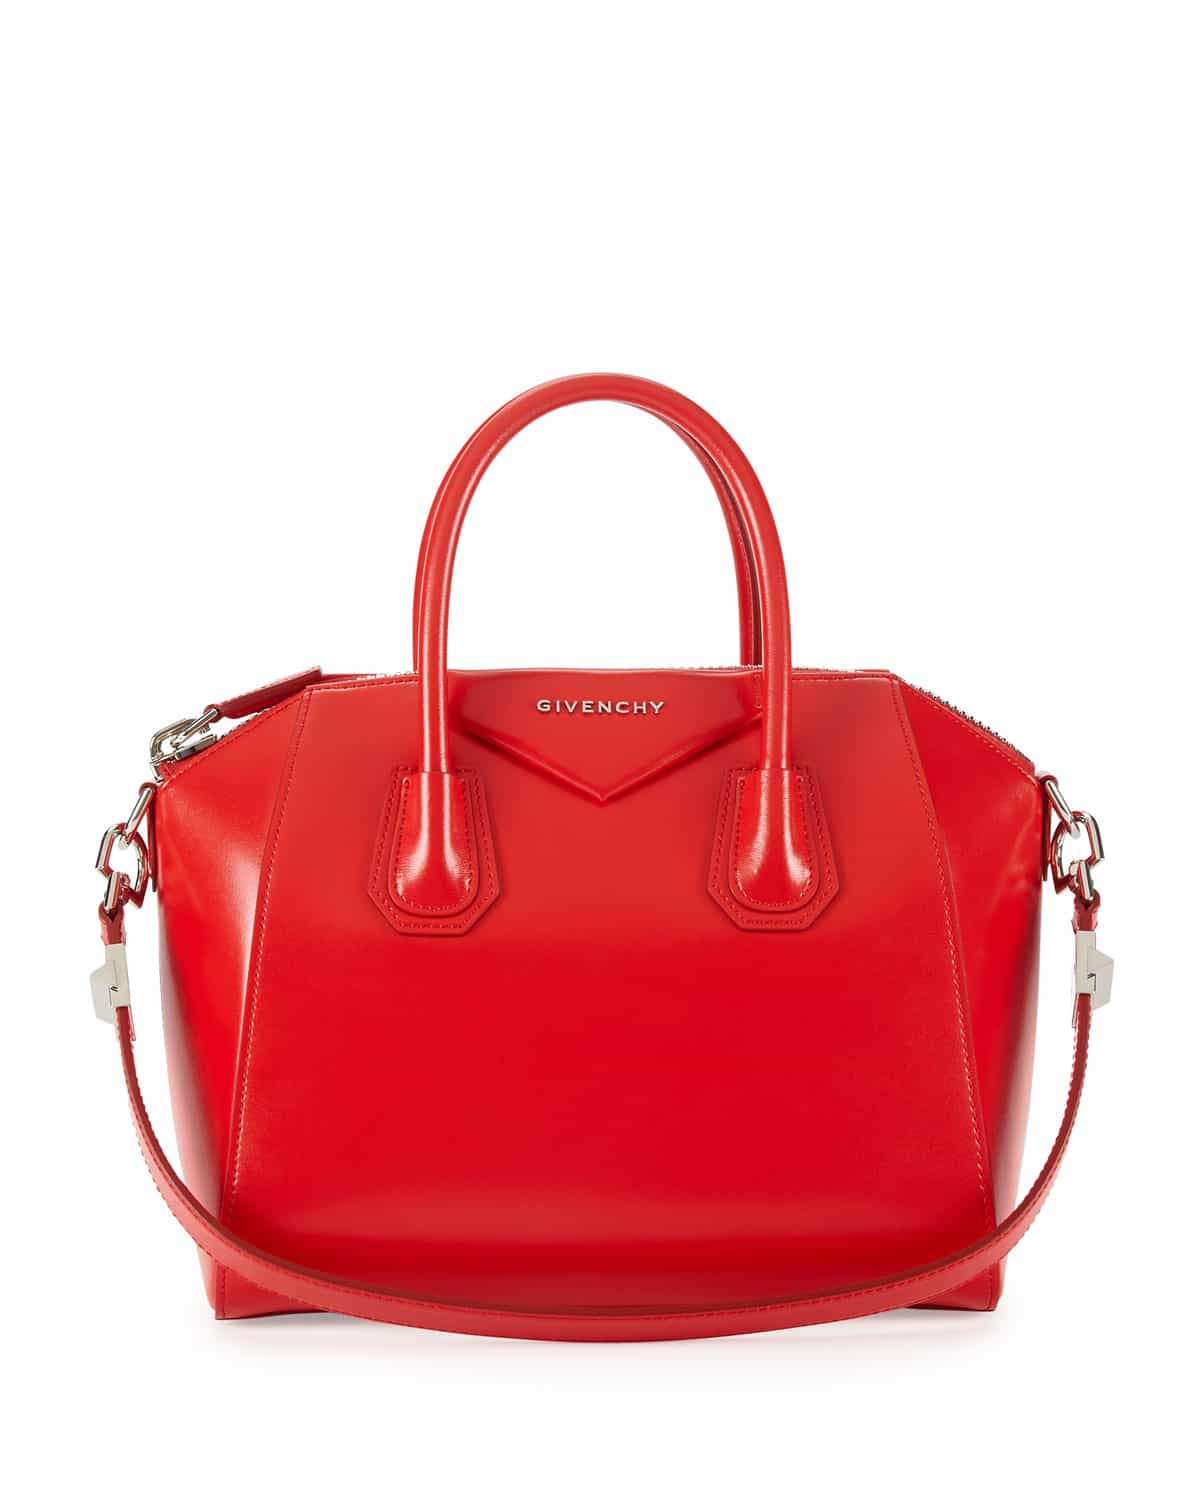 More Givenchy Pre-fall 2014 Bags including More Mini Antigona Styles | Spotted Fashion